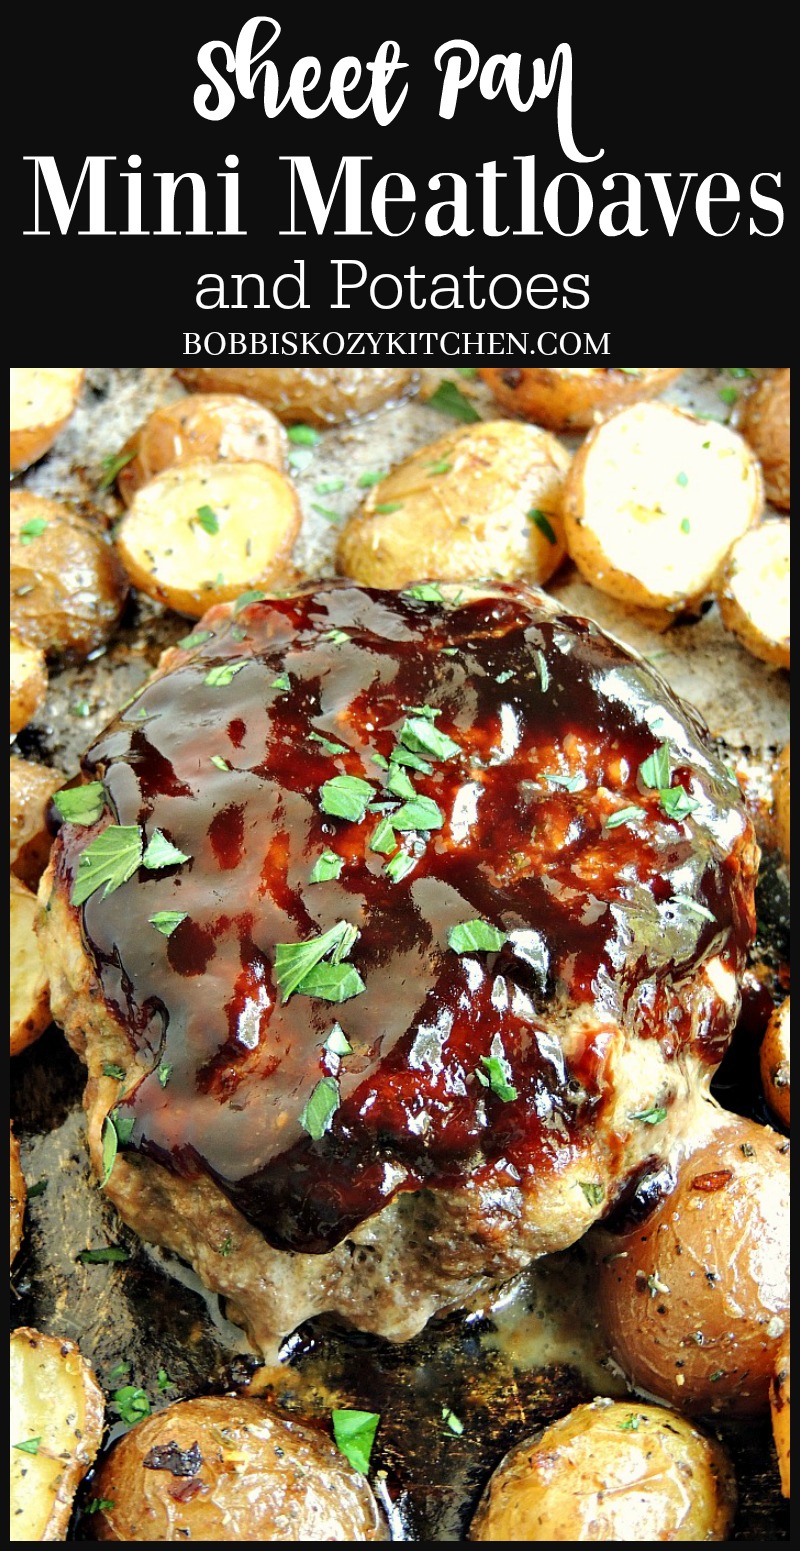 Simple and delicious, these Sheet Pan Mini Meatloaves are the answer to your weeknight meal needs from www.bobbiskozykitchen.com